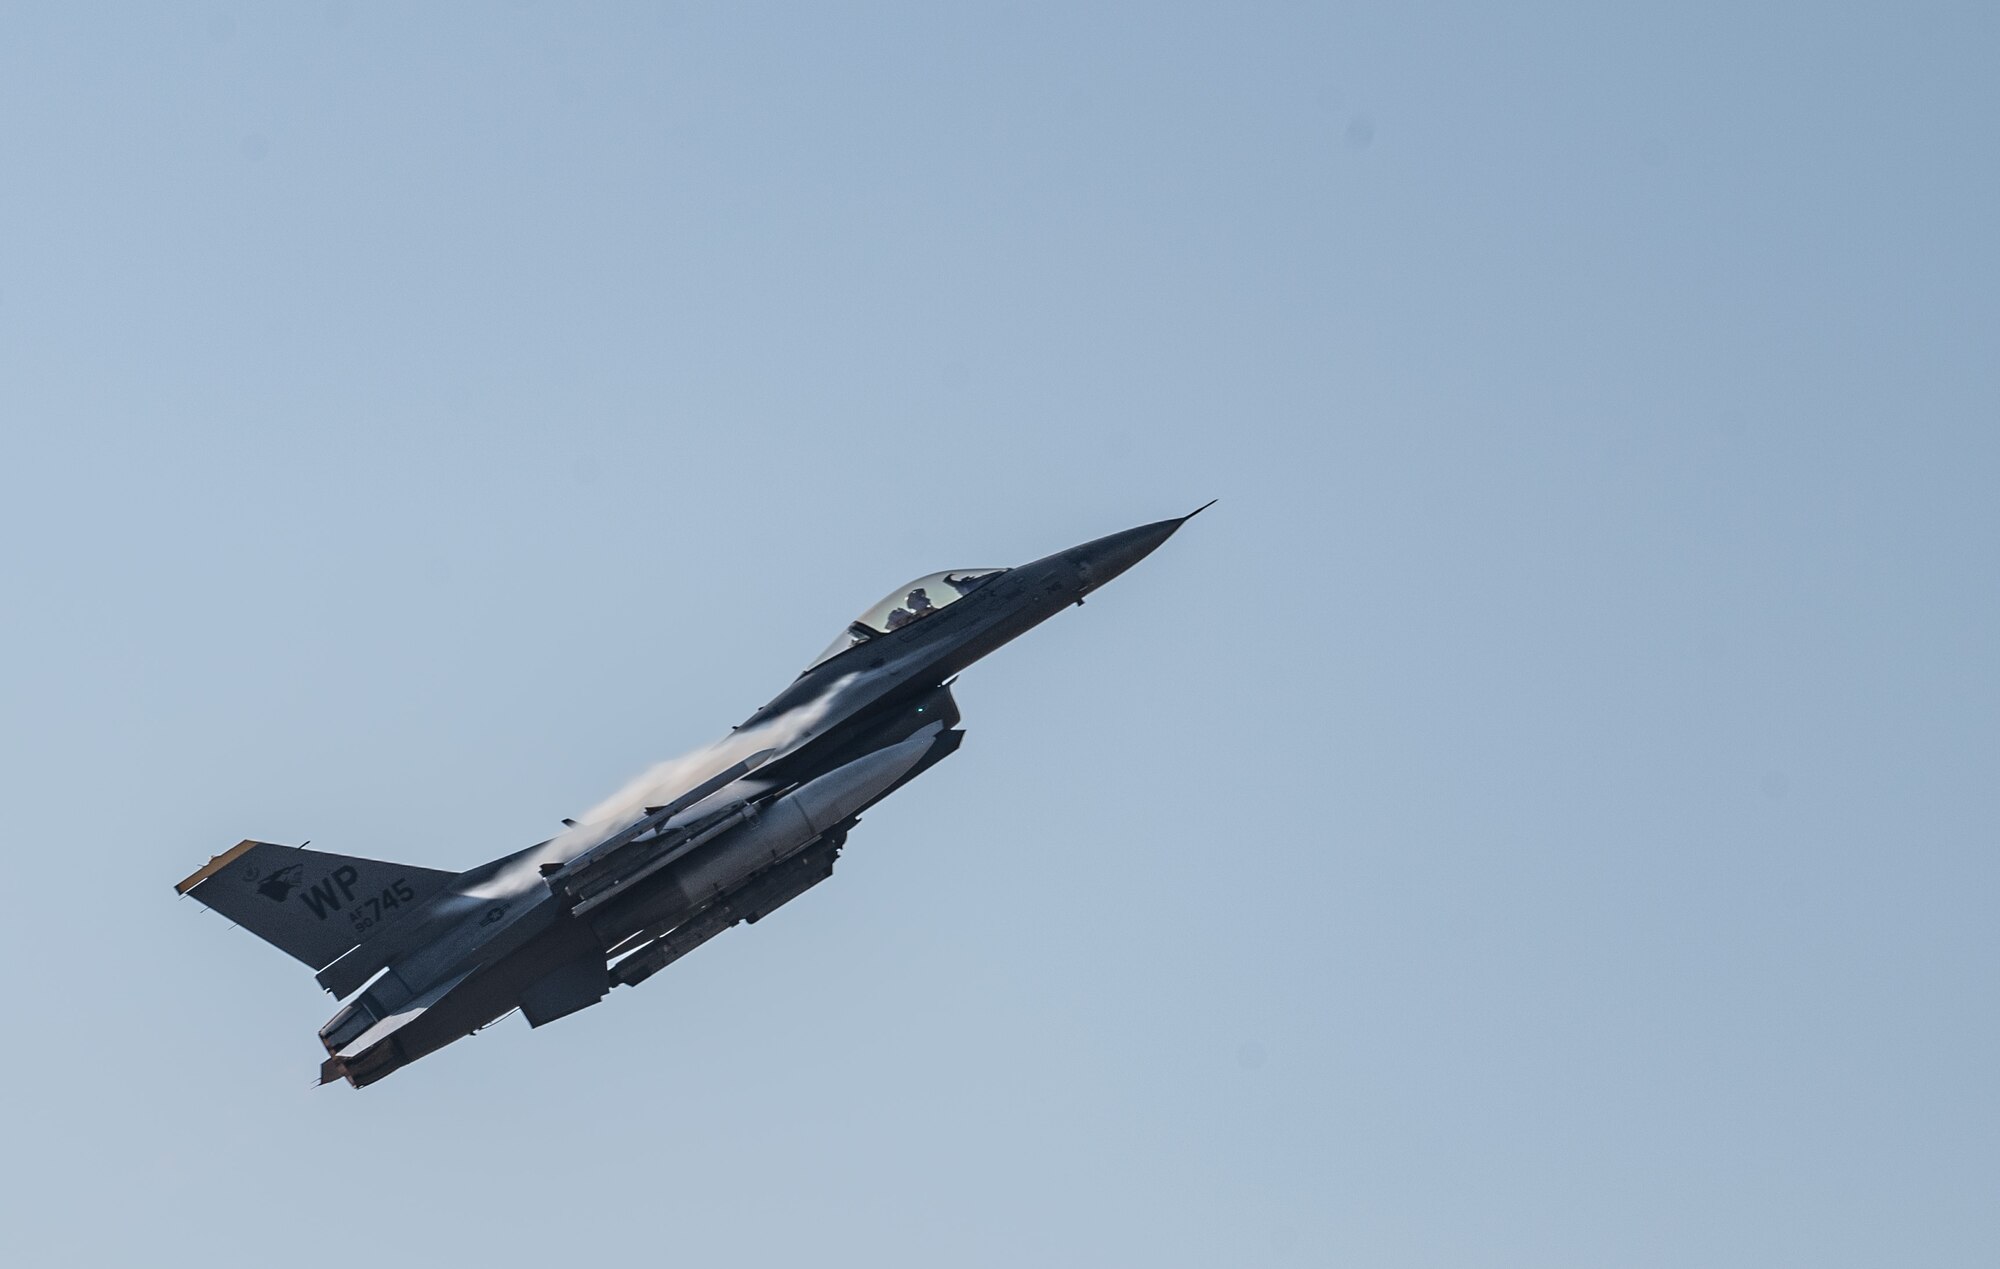 An 80th Fighter Squadron F-16 Fighting Falcon performs a combat takeoff during training at Kunsan Air Base, Republic of Korea, Nov. 18, 2022. The aircraft’s avionics systems include a highly accurate enhanced global positioning and inertial navigation systems, and also includes a warning system and modular countermeasure pods to be used against airborne or surface electronic threats. (U.S. Air Force photo by Staff Sgt. Sadie Colbert)